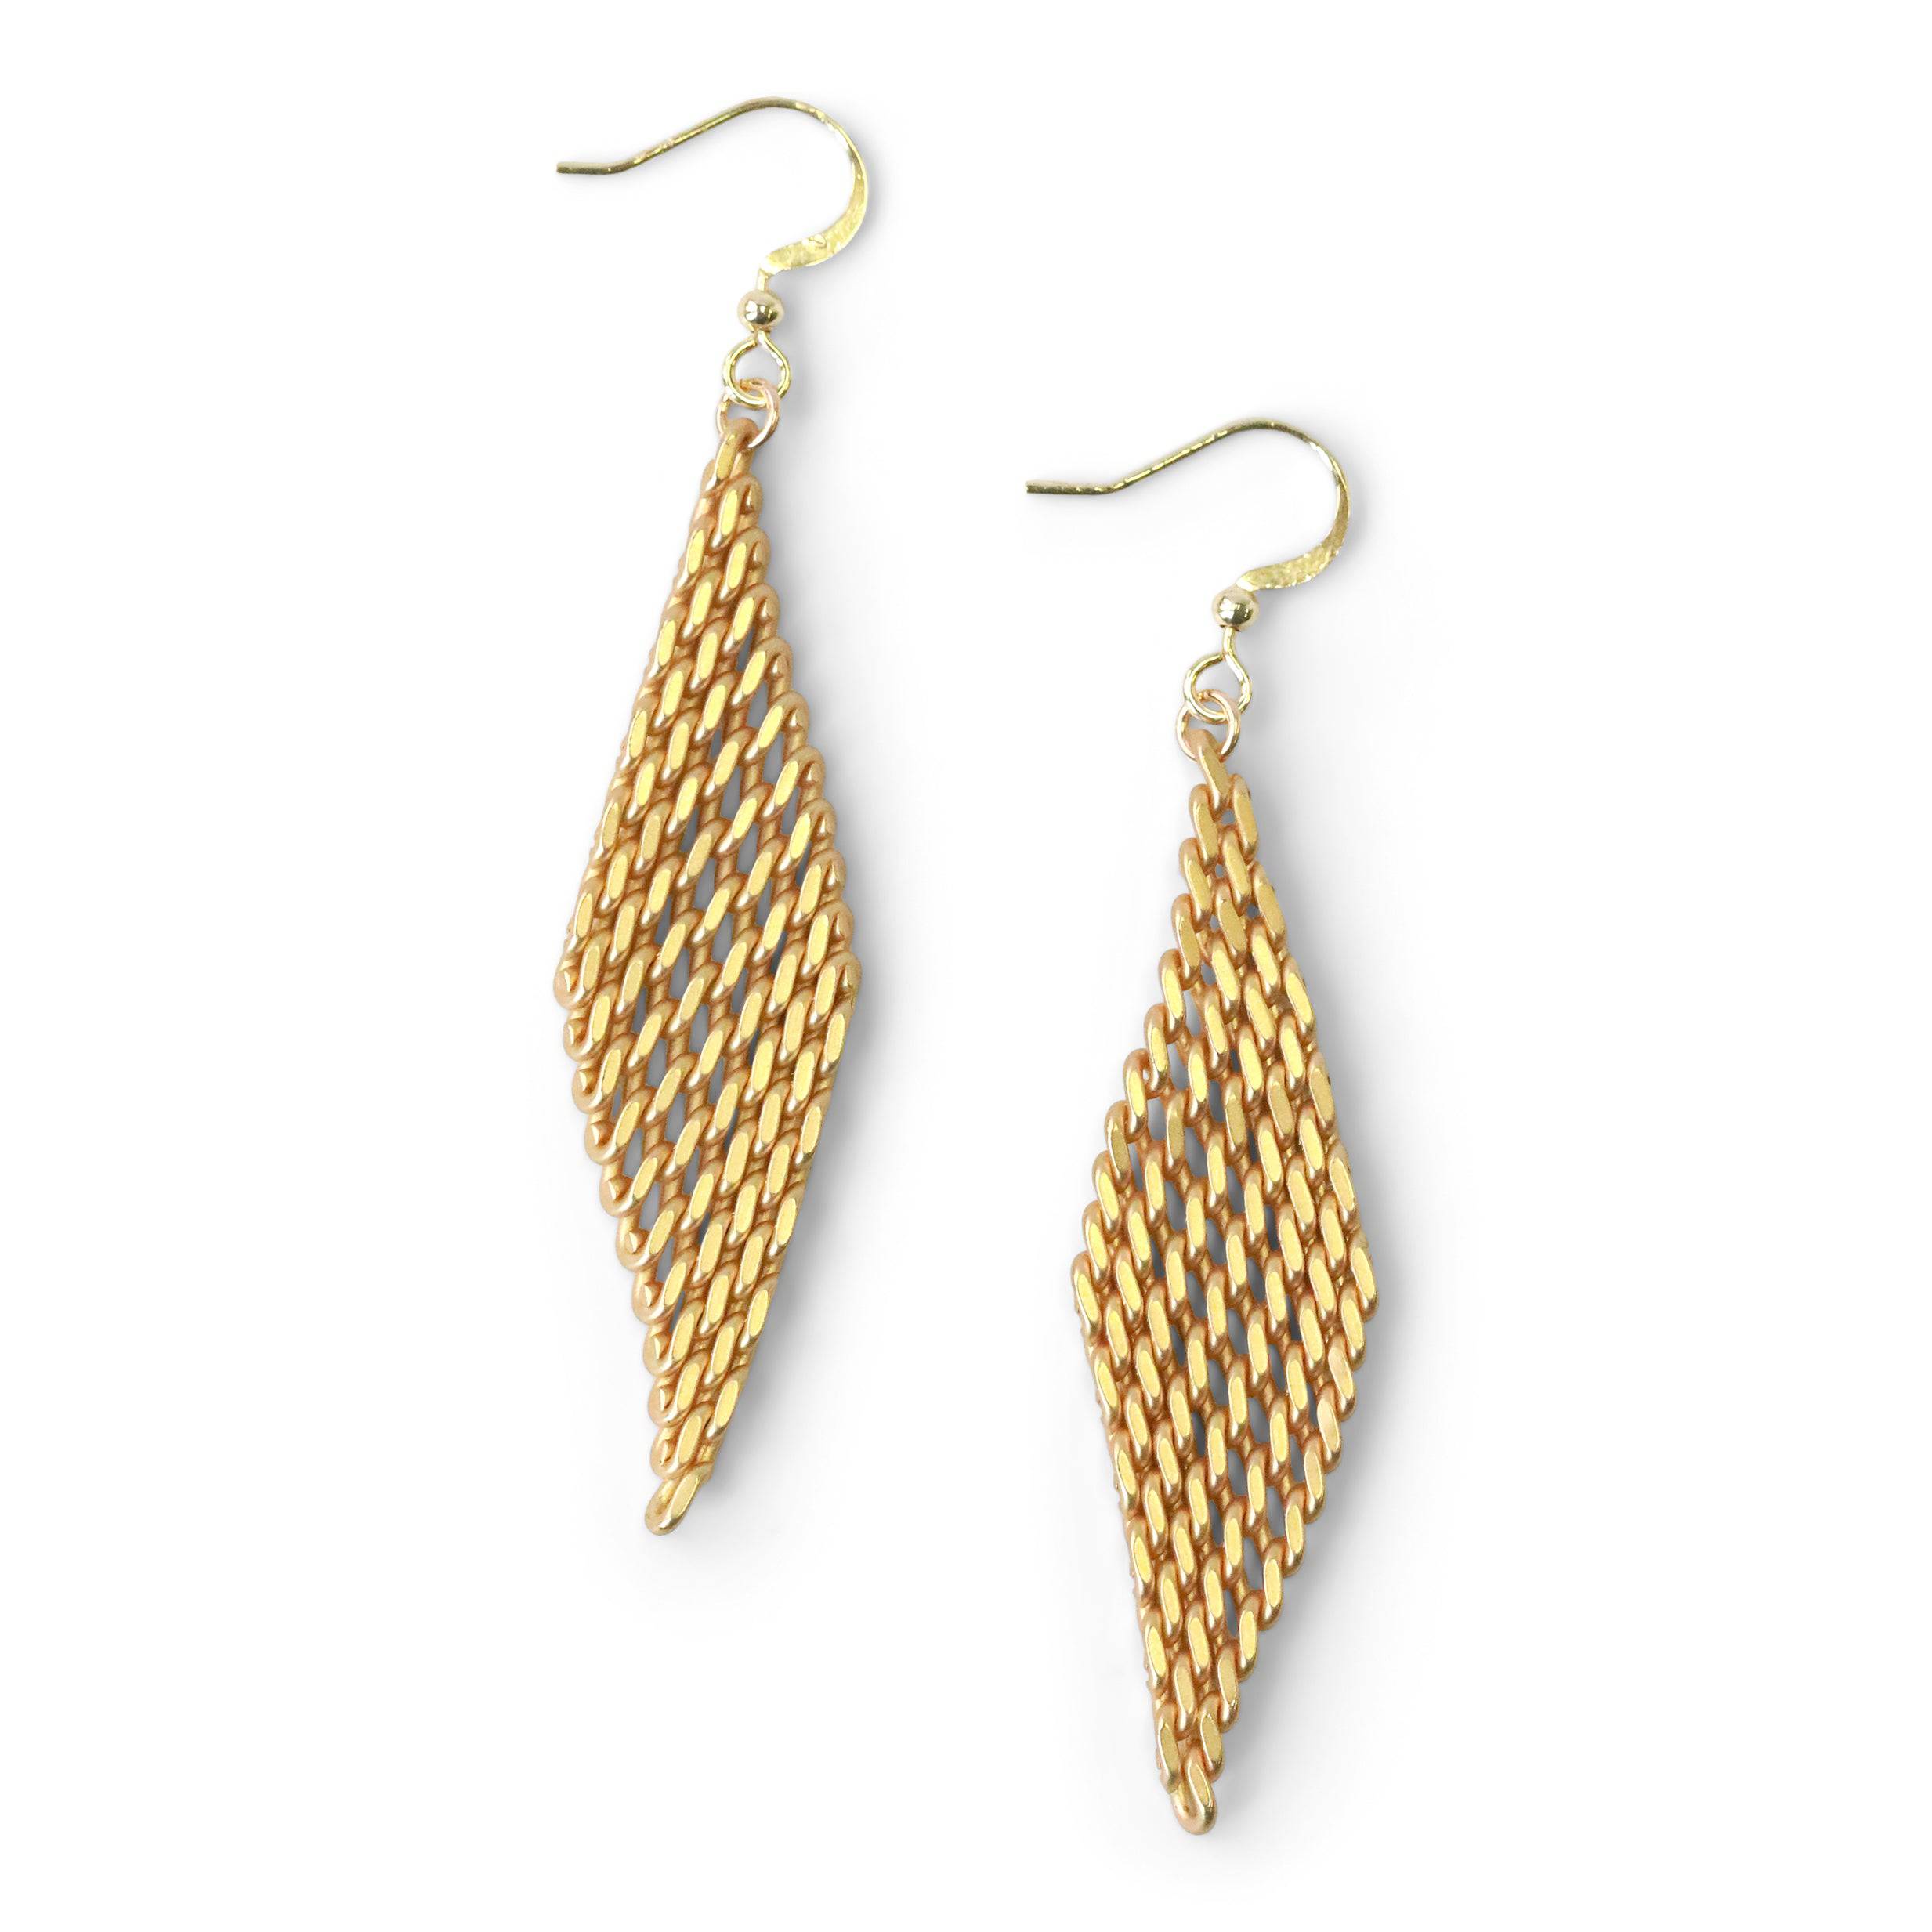 Mithril Earrings - The Gilded Witch